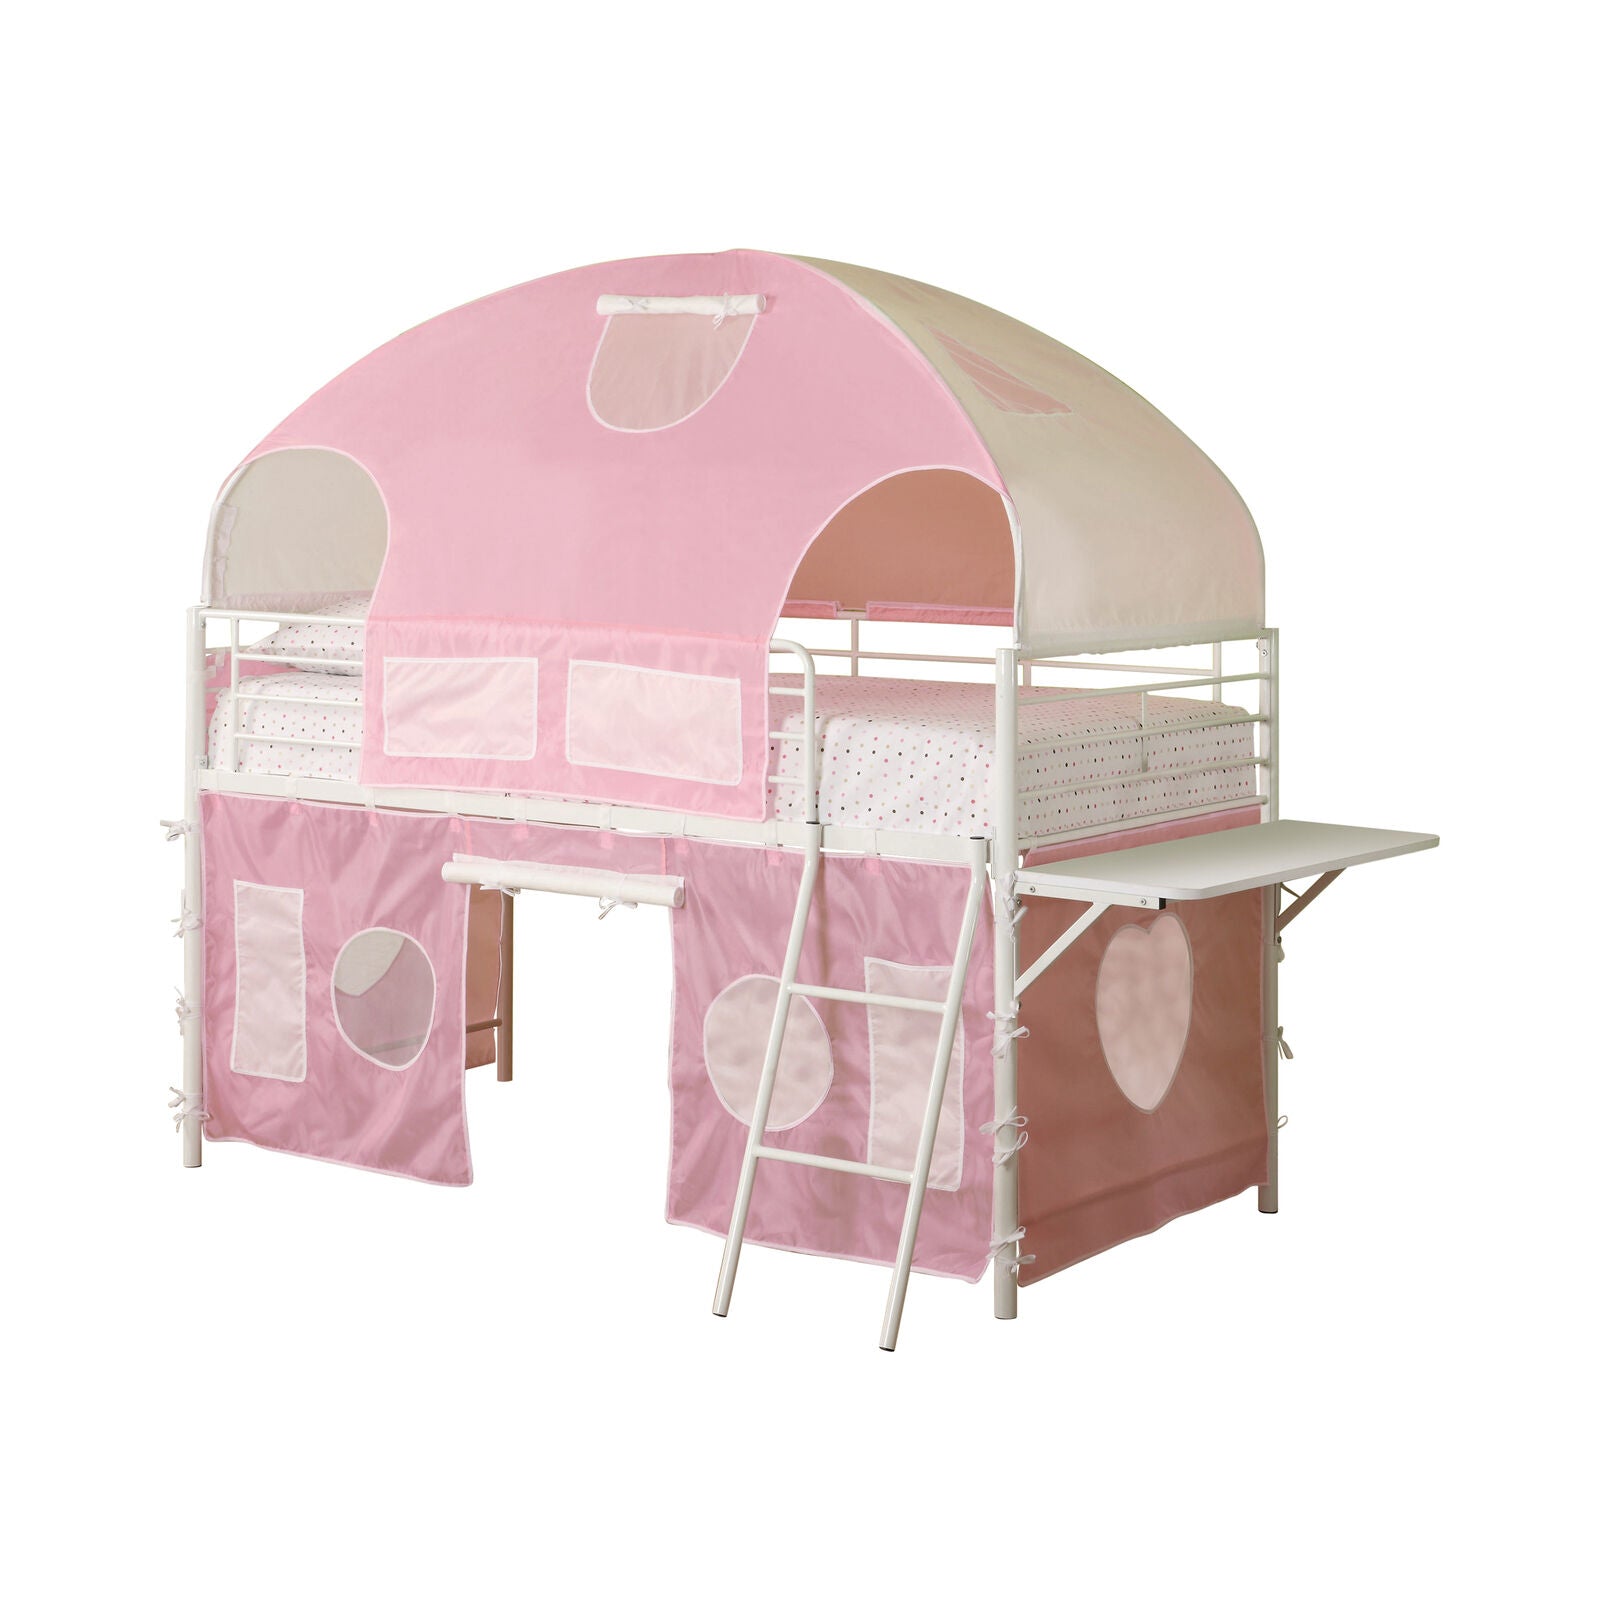 Twin Princess Sweetheart Tent Loft Bunk Bed Ladder Pink And White